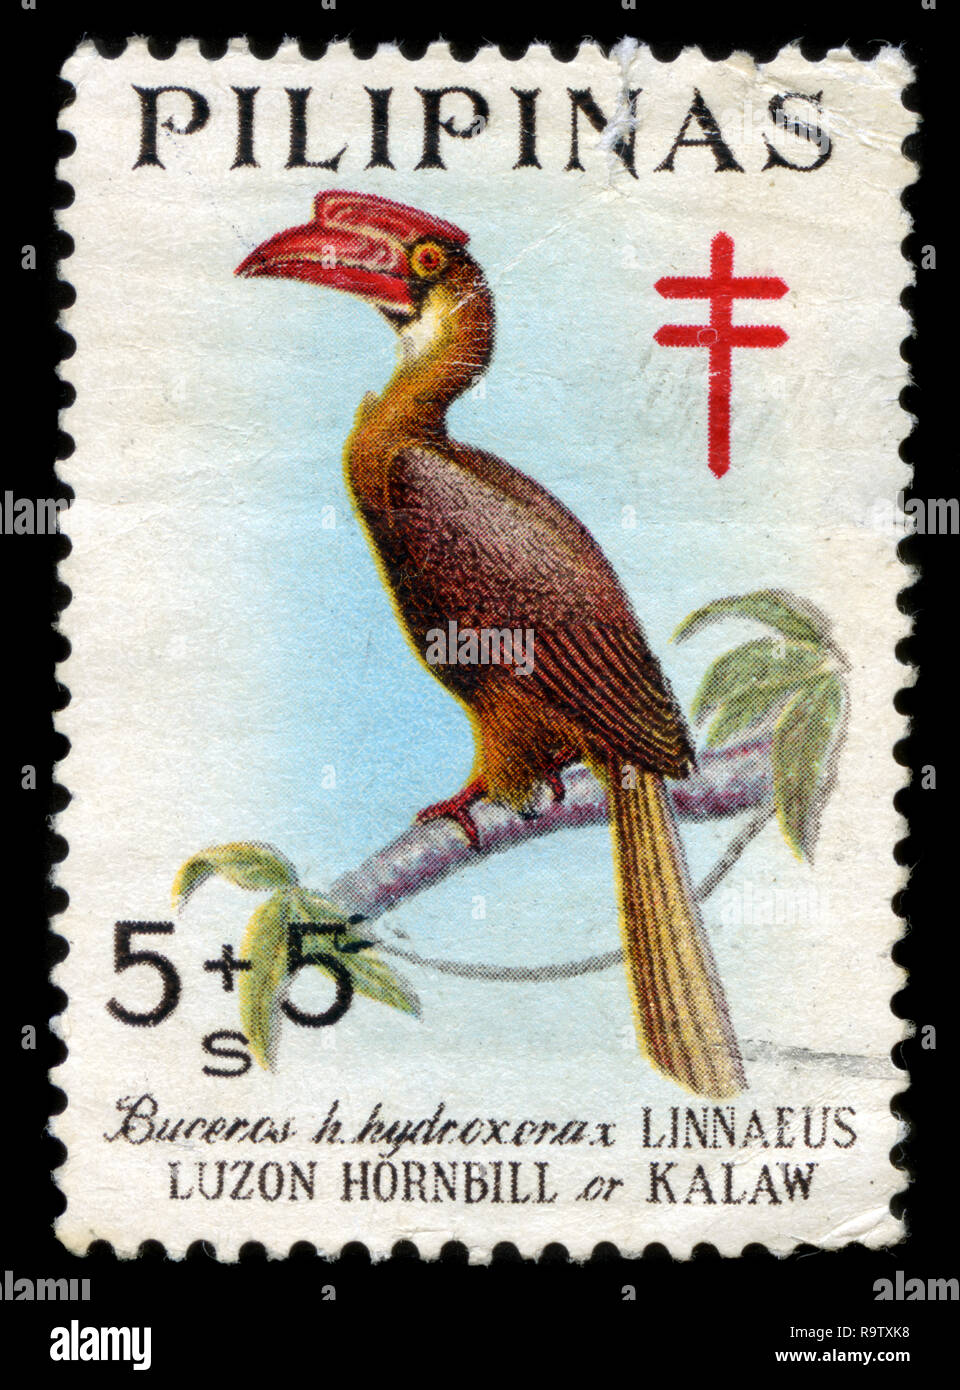 Postage stamp from the Philippines in the Fight against tuberculosis – Native Birds series issued in 1967 Stock Photo